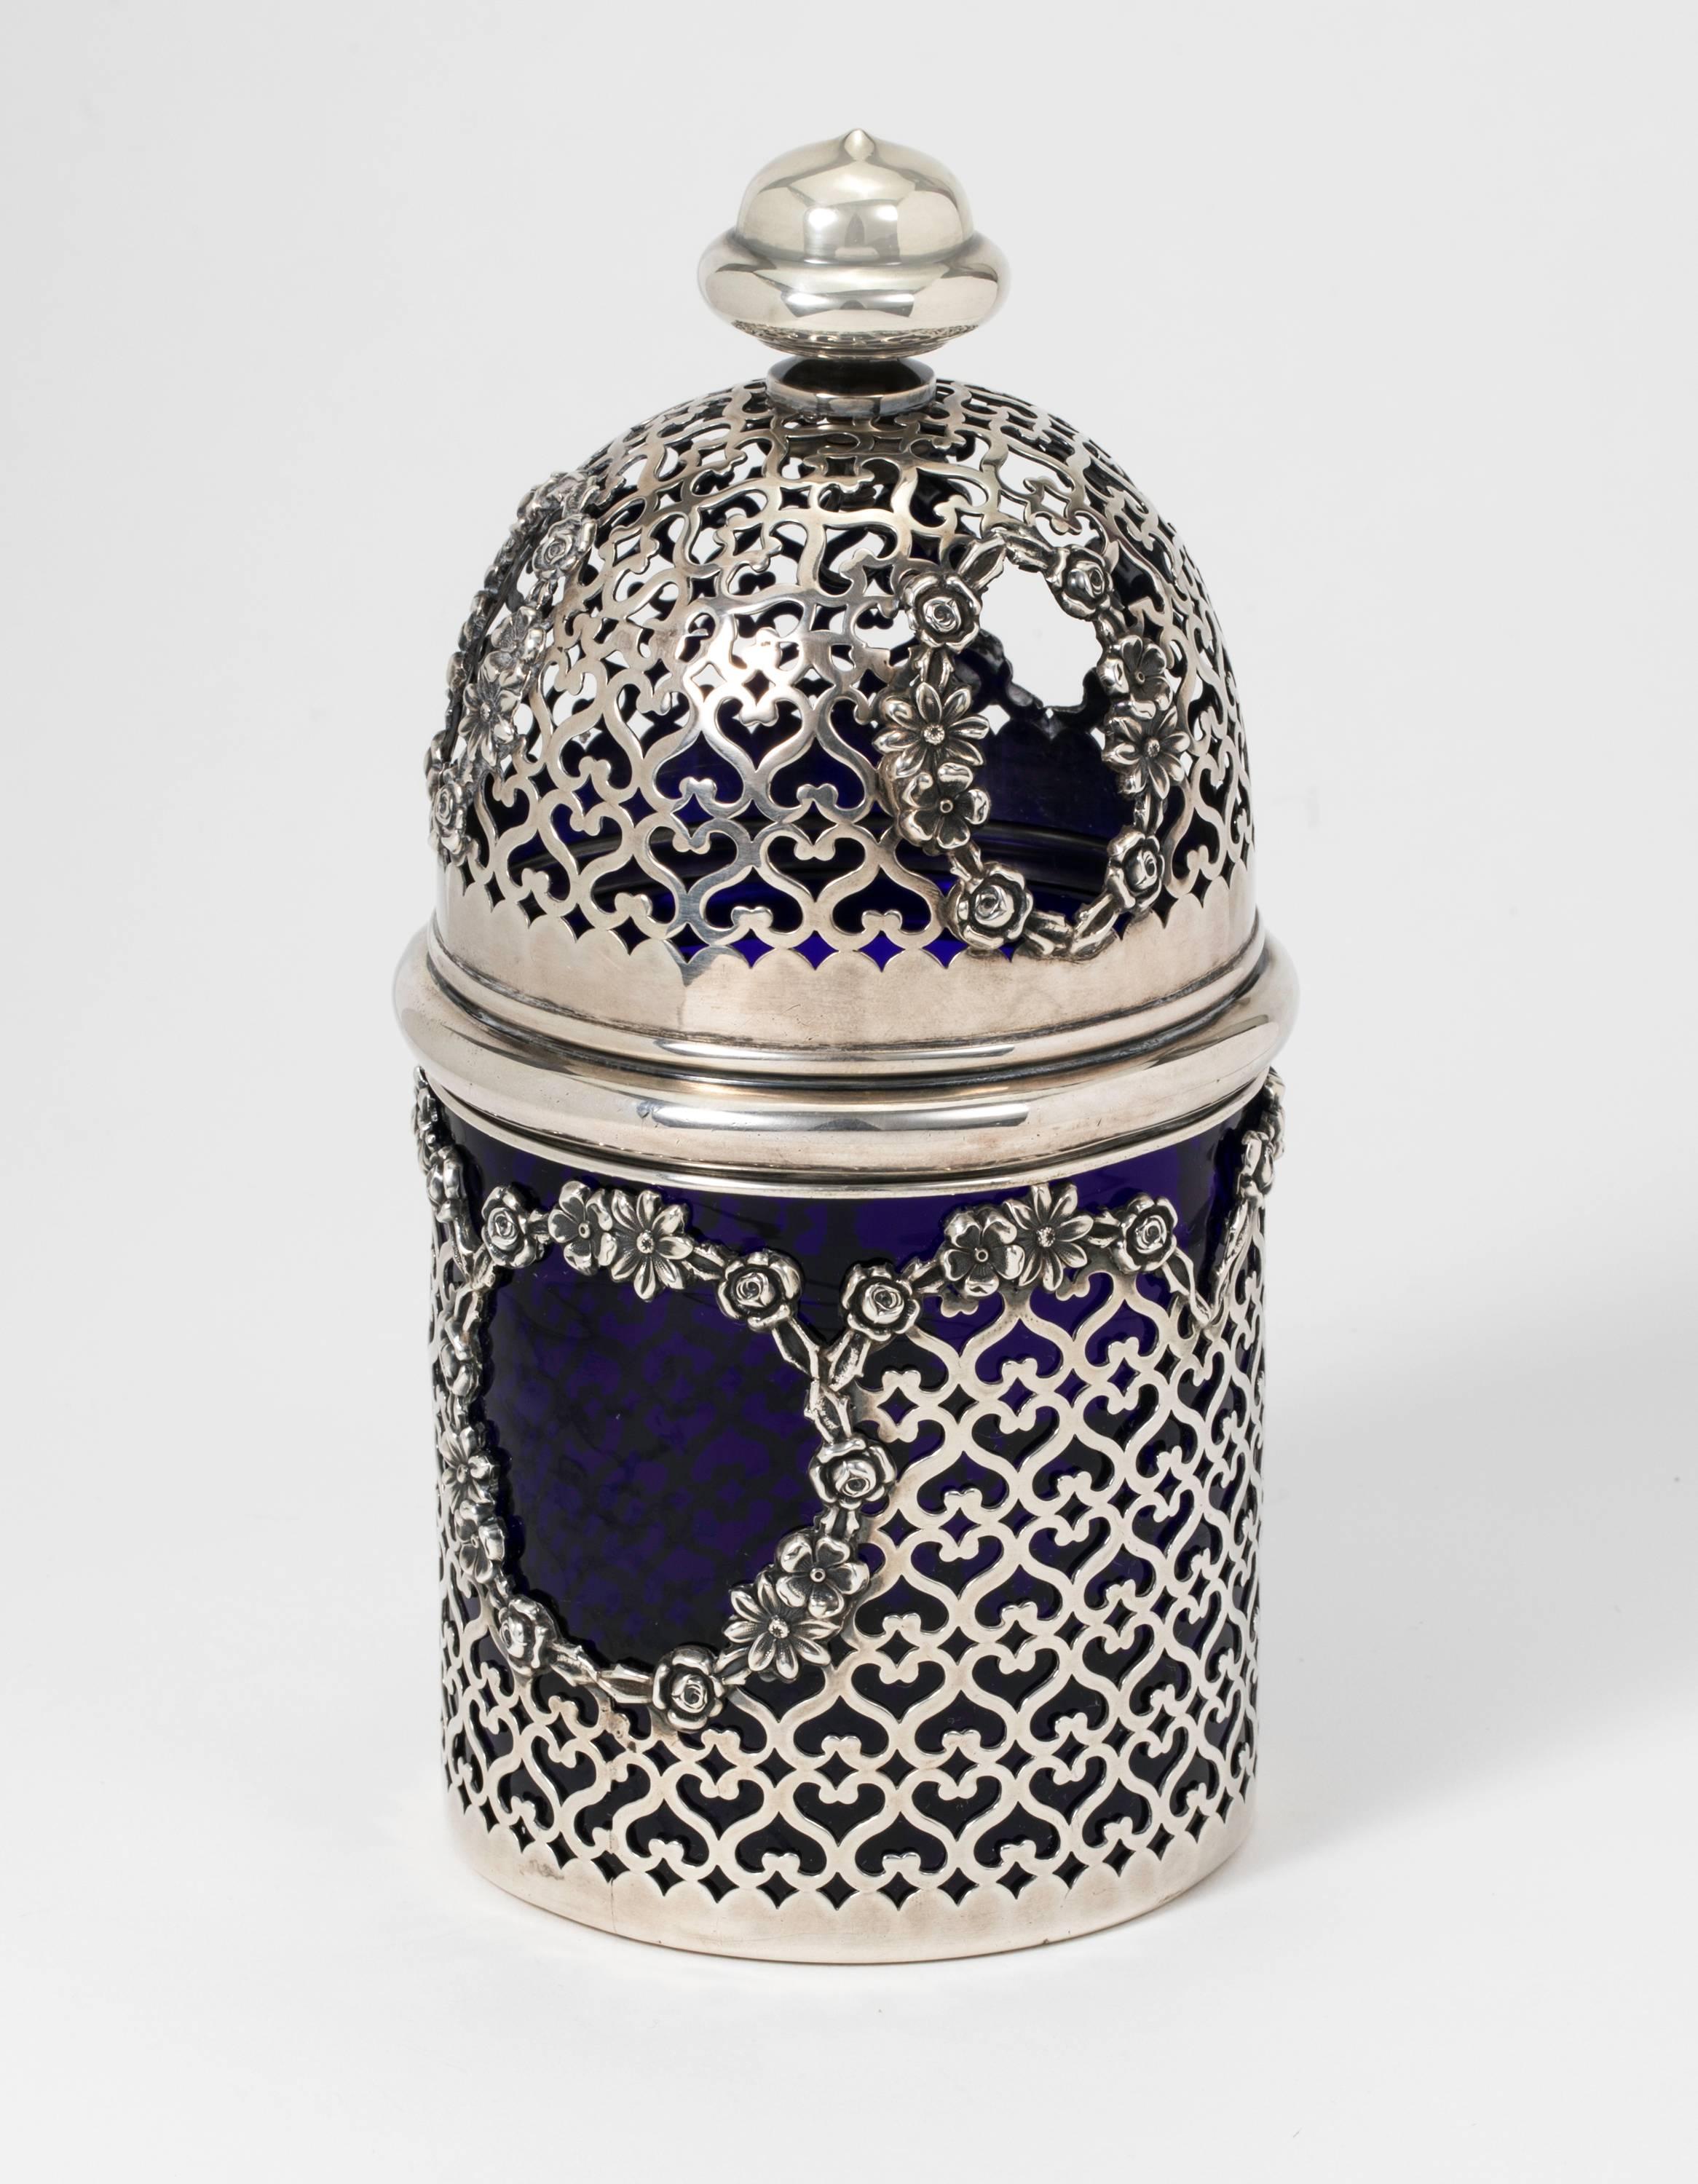 Rare, Potpourri Jar.   Pierced floral design sterling silver basket housing a blue cobalt glass jar, from circa 1940s.
Beautiful matching domed lid is also sterling pierced for functional aroma therapy. There is an interior hook for holding a wet